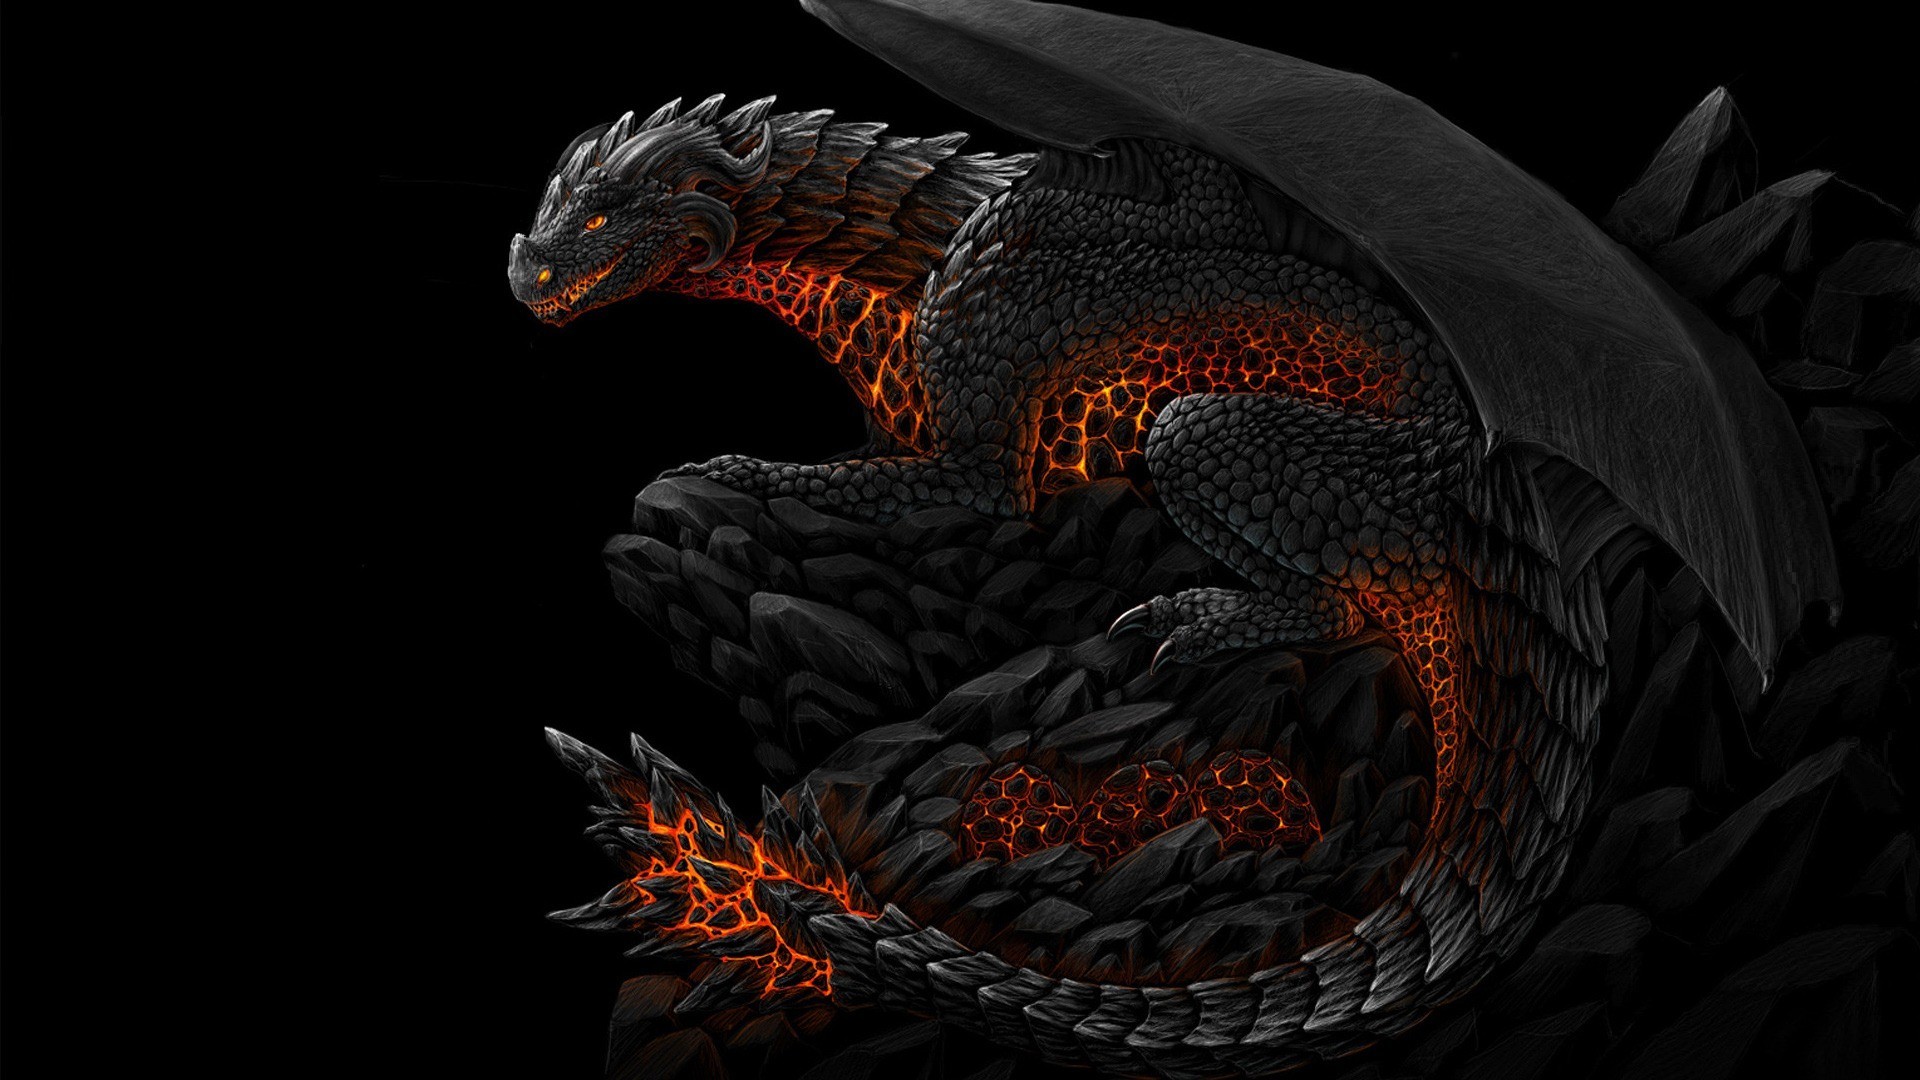 1920x1080 Black Dragon HD Wallpapers For Pc with ID 10120 on Abstract category in  Amazing Wallpaperz. Black Dragon HD Wallpapers For Pc is one from many Best  HD ...